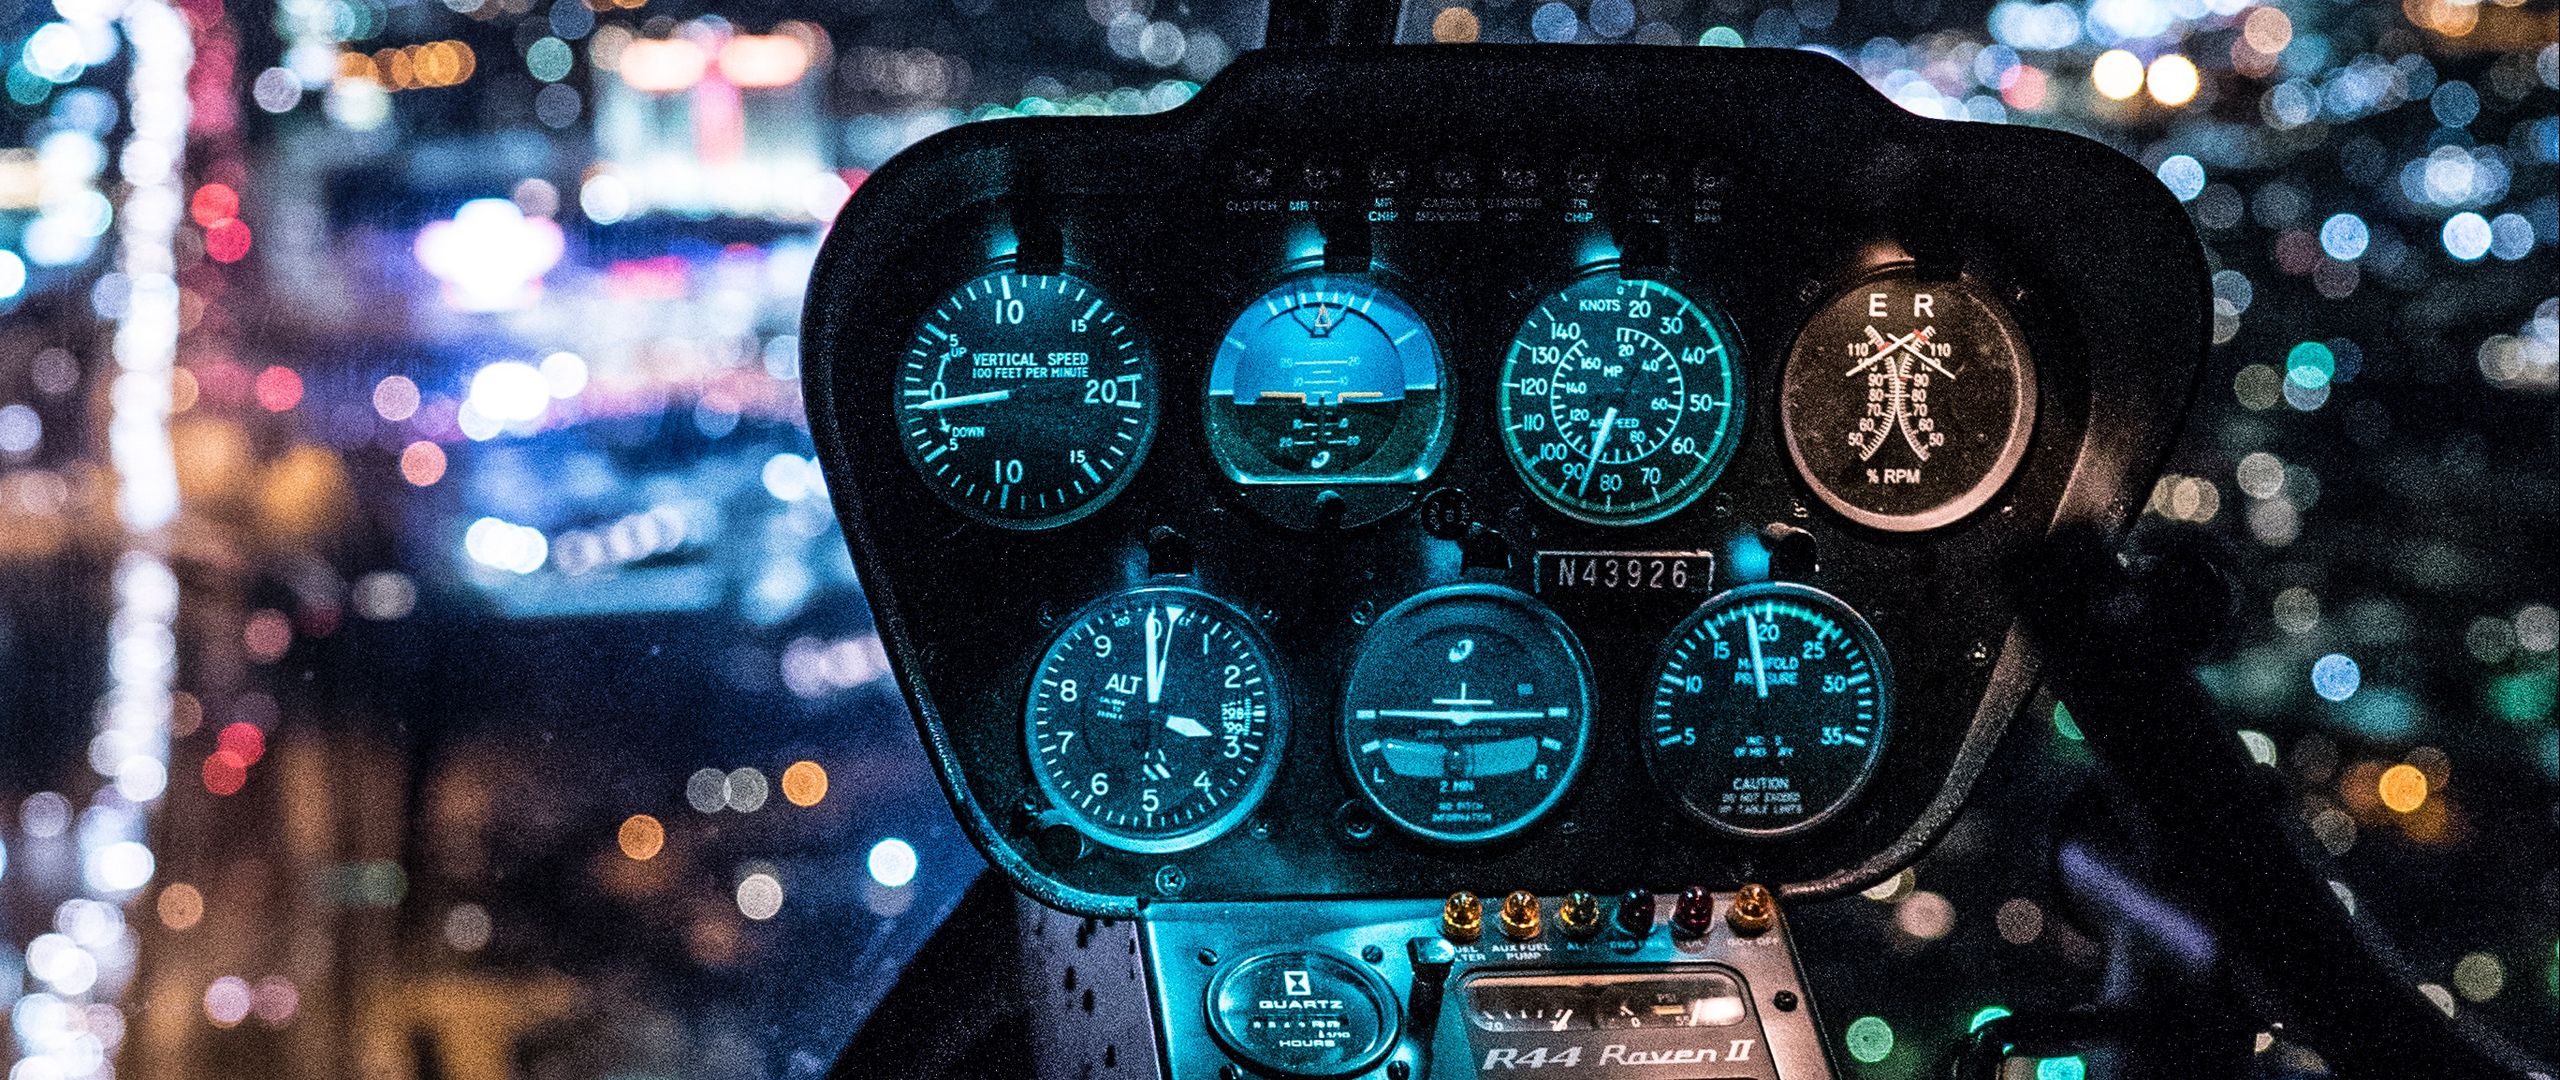 Download Wallpaper 2560x1080 Helicopter Cockpit Control Dual Wide 1080p Hd Background